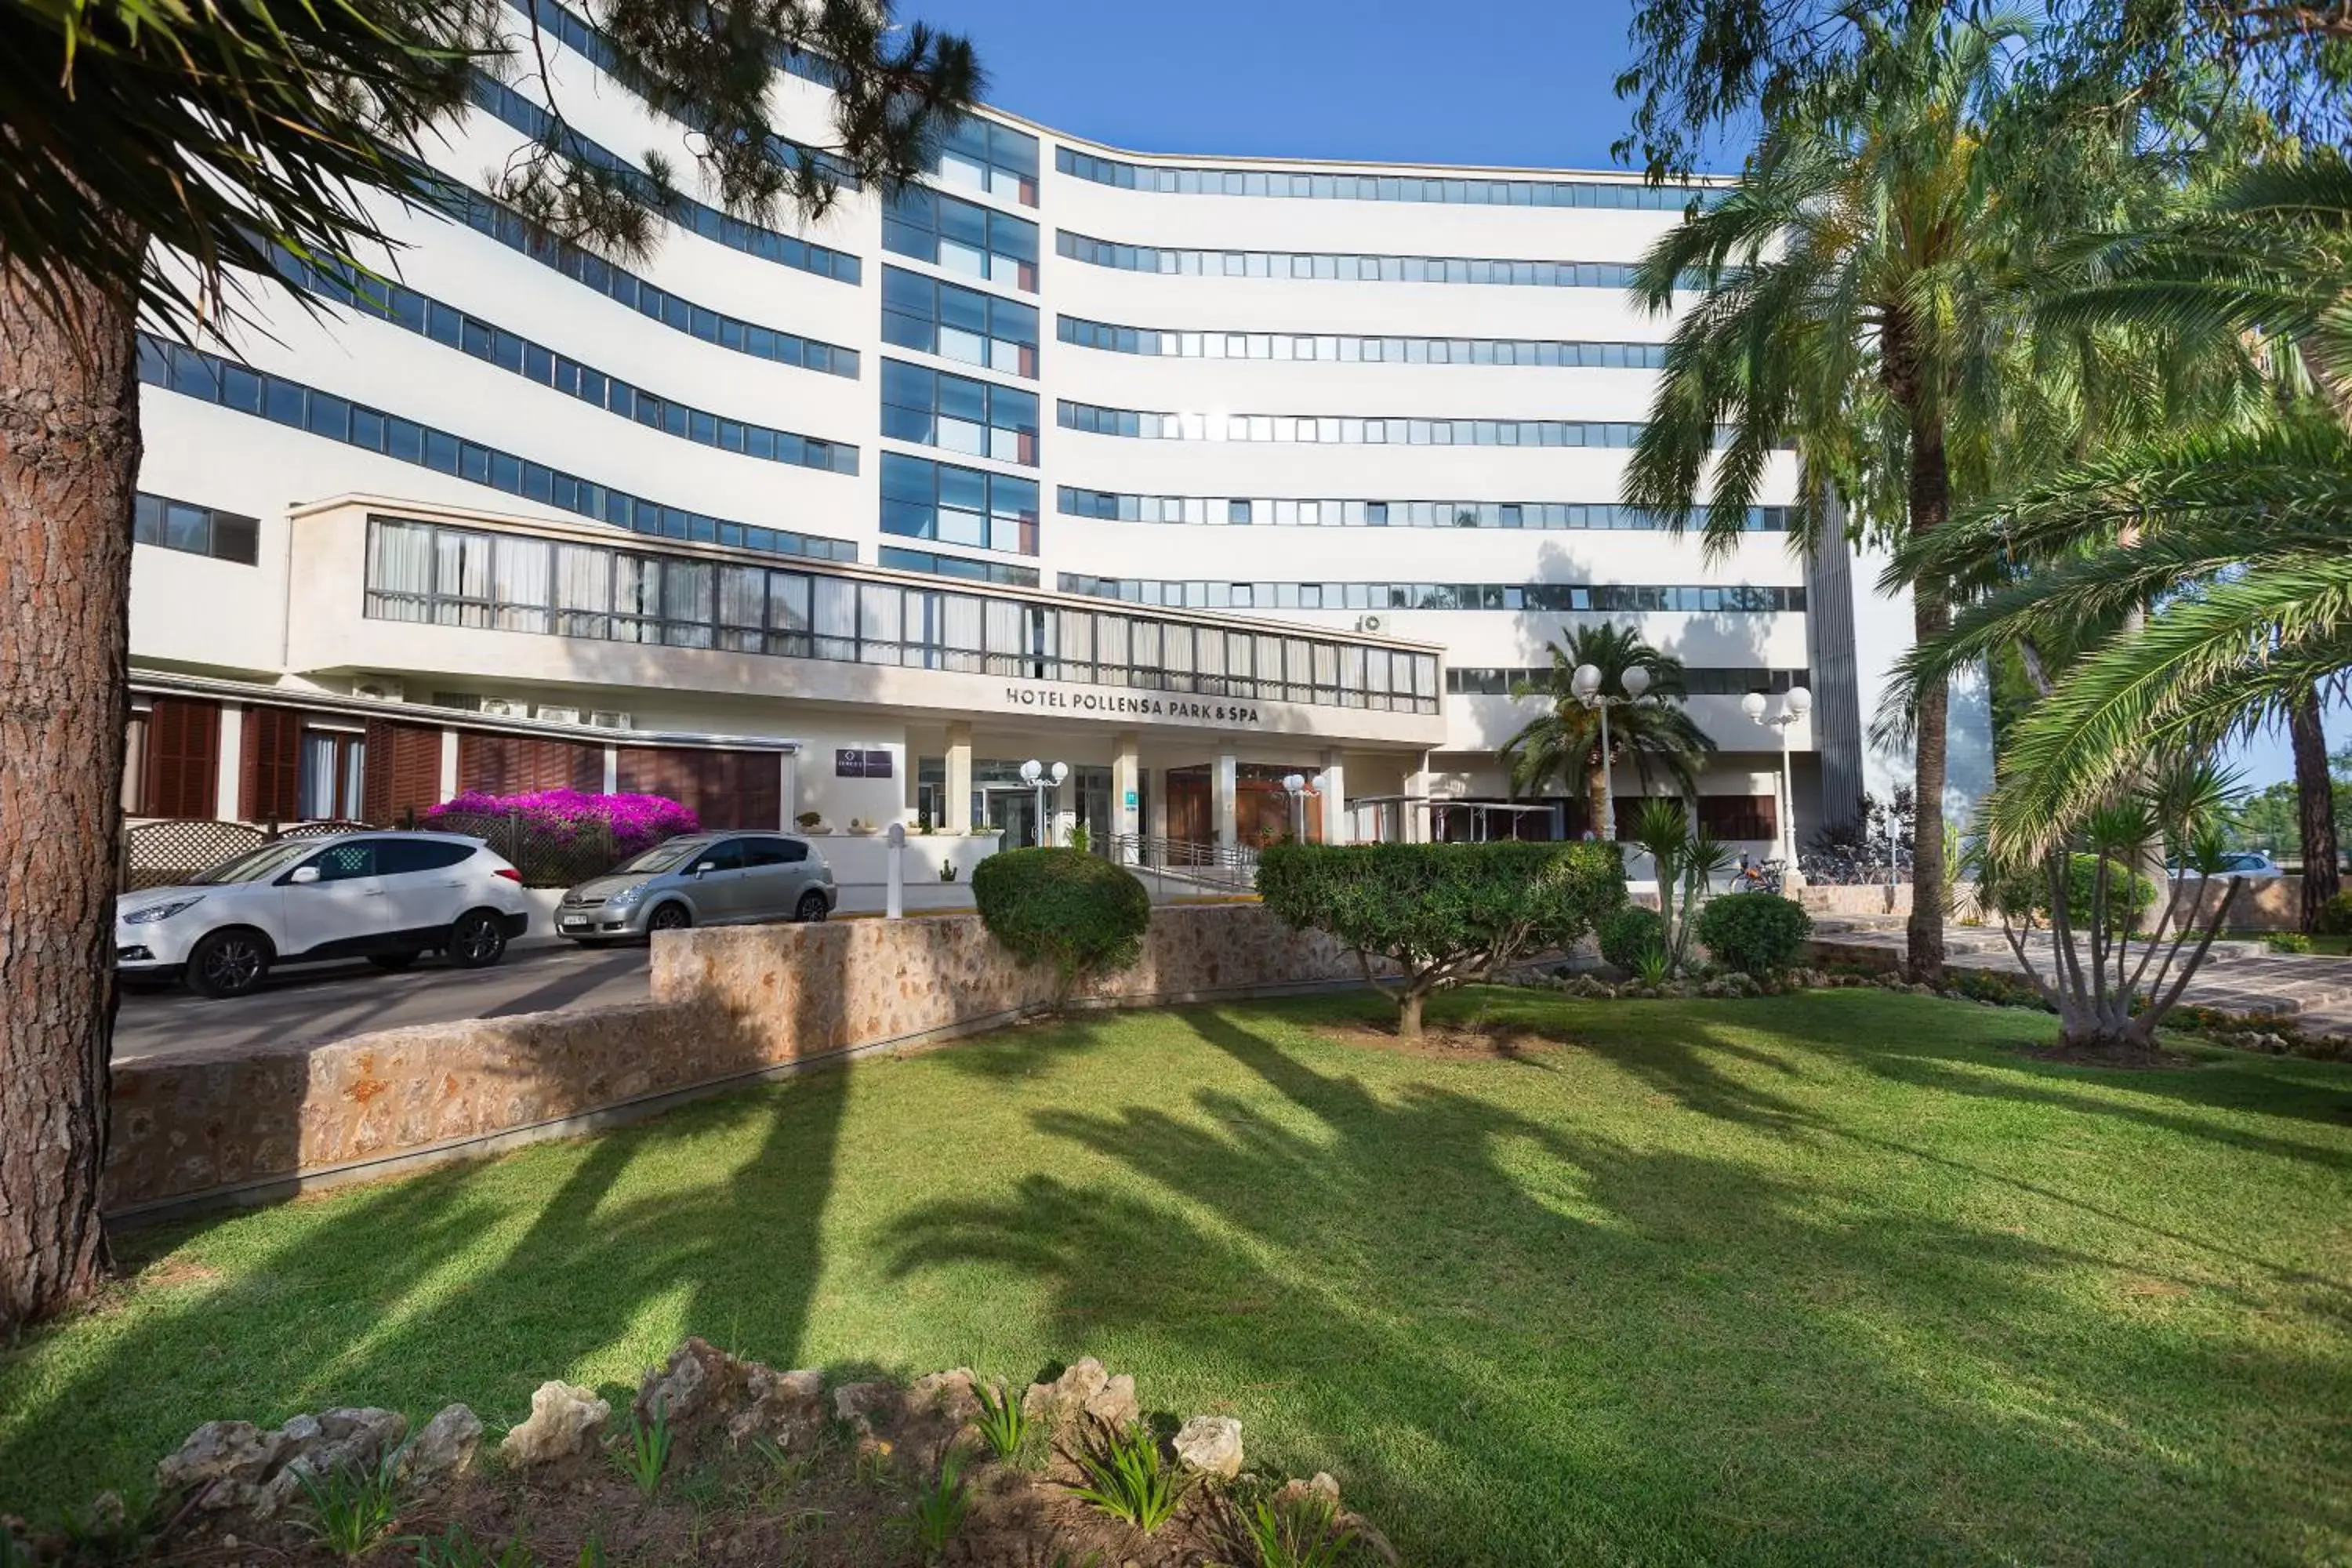 Off site, Property Building in Cabot Pollensa Park Spa